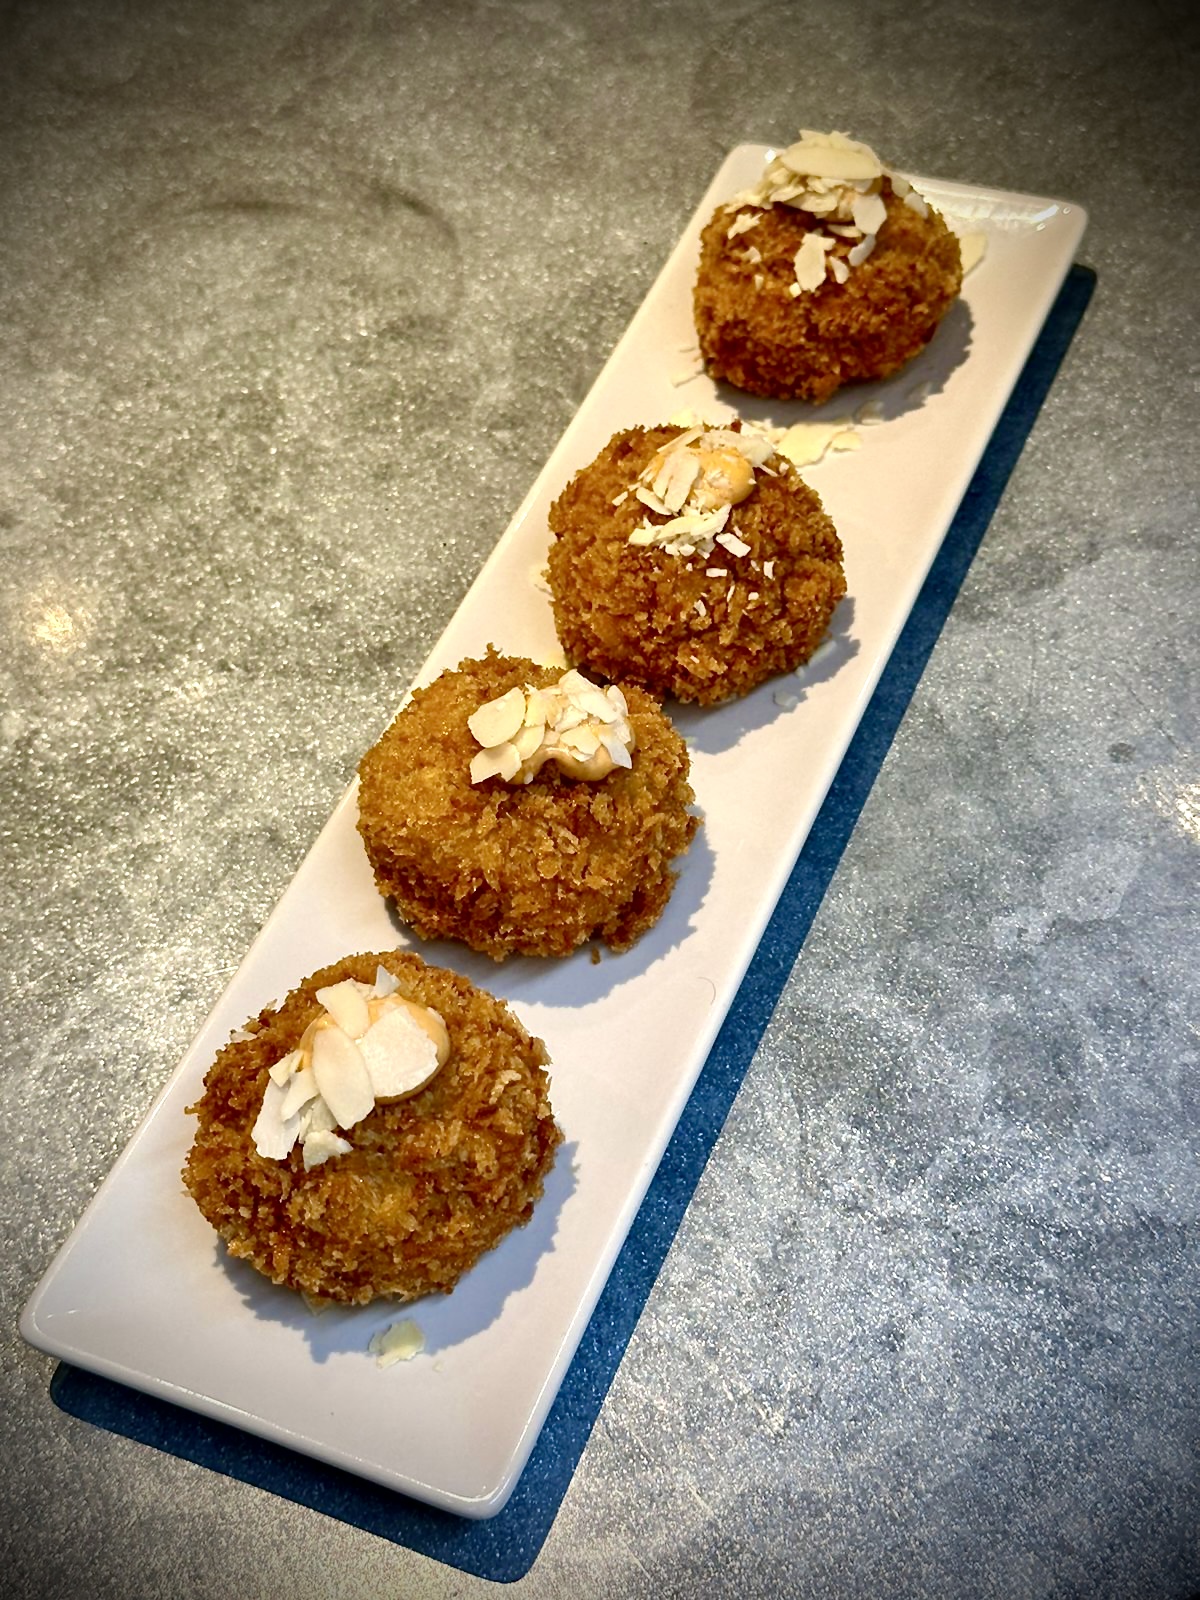 PULLED PORK CROQUETTES "NEW"